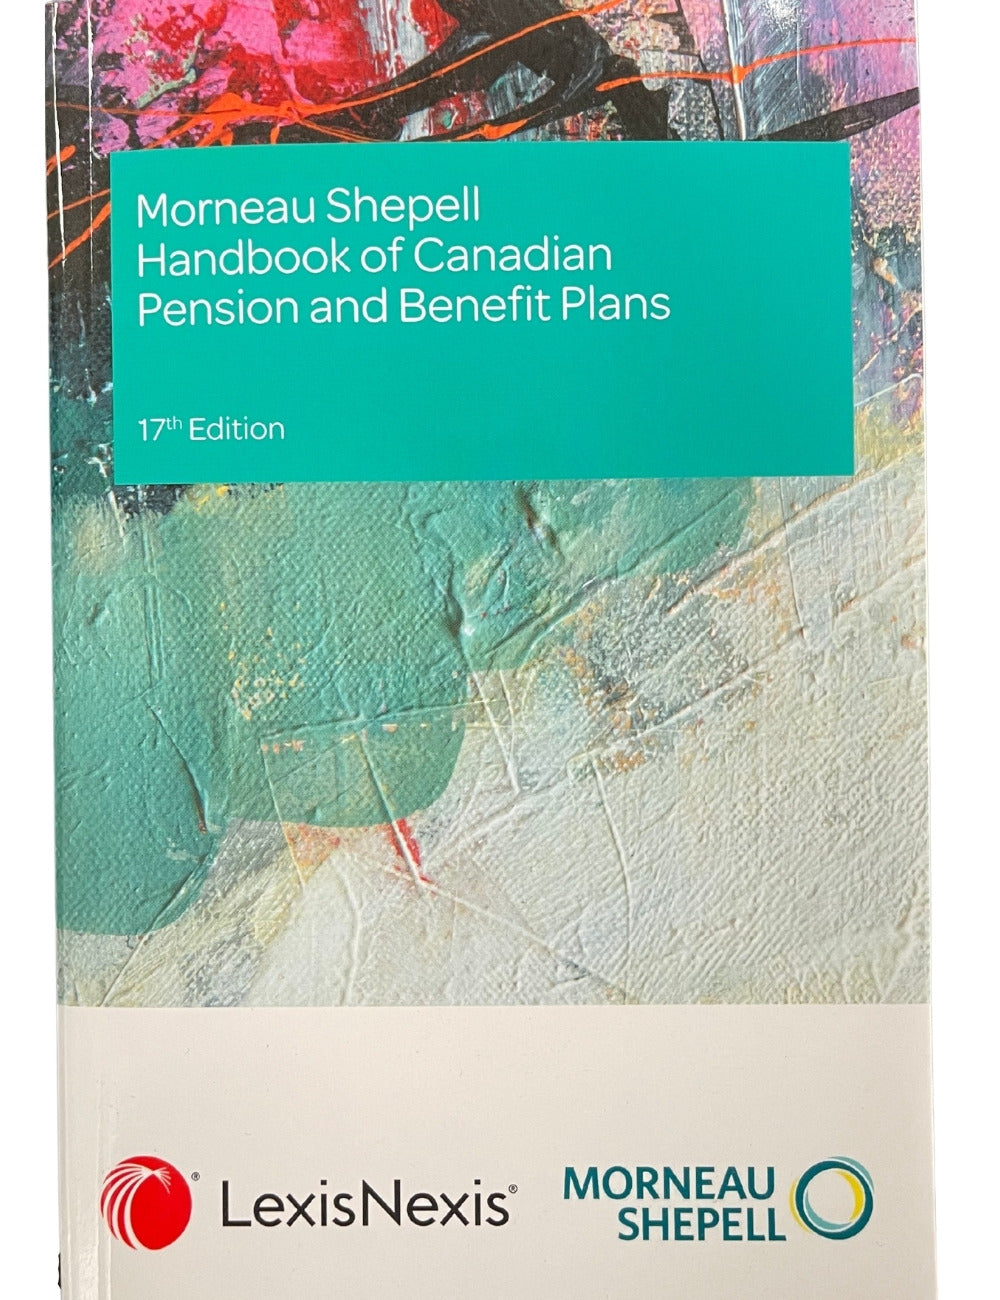 RPA 1 Text Morneau Shepell Handbook of Canadian Pension and Benefit Plans 17th edition